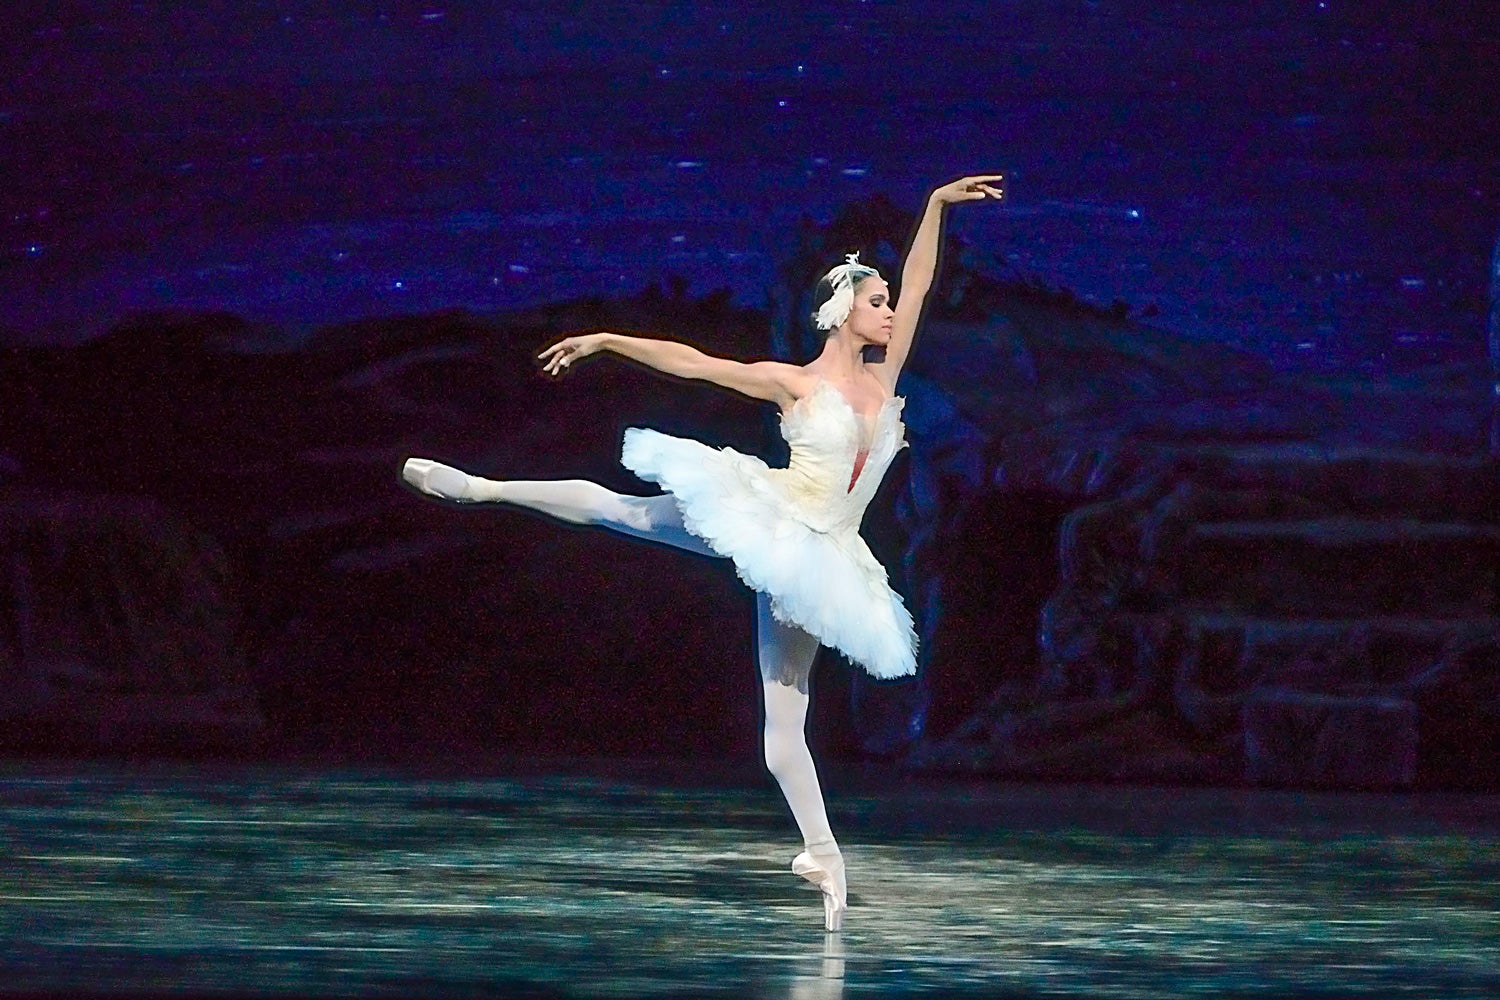 Ballerina Misty Copeland  perrforms San Lake on stage in white leotard and tutu, leg and ams extended